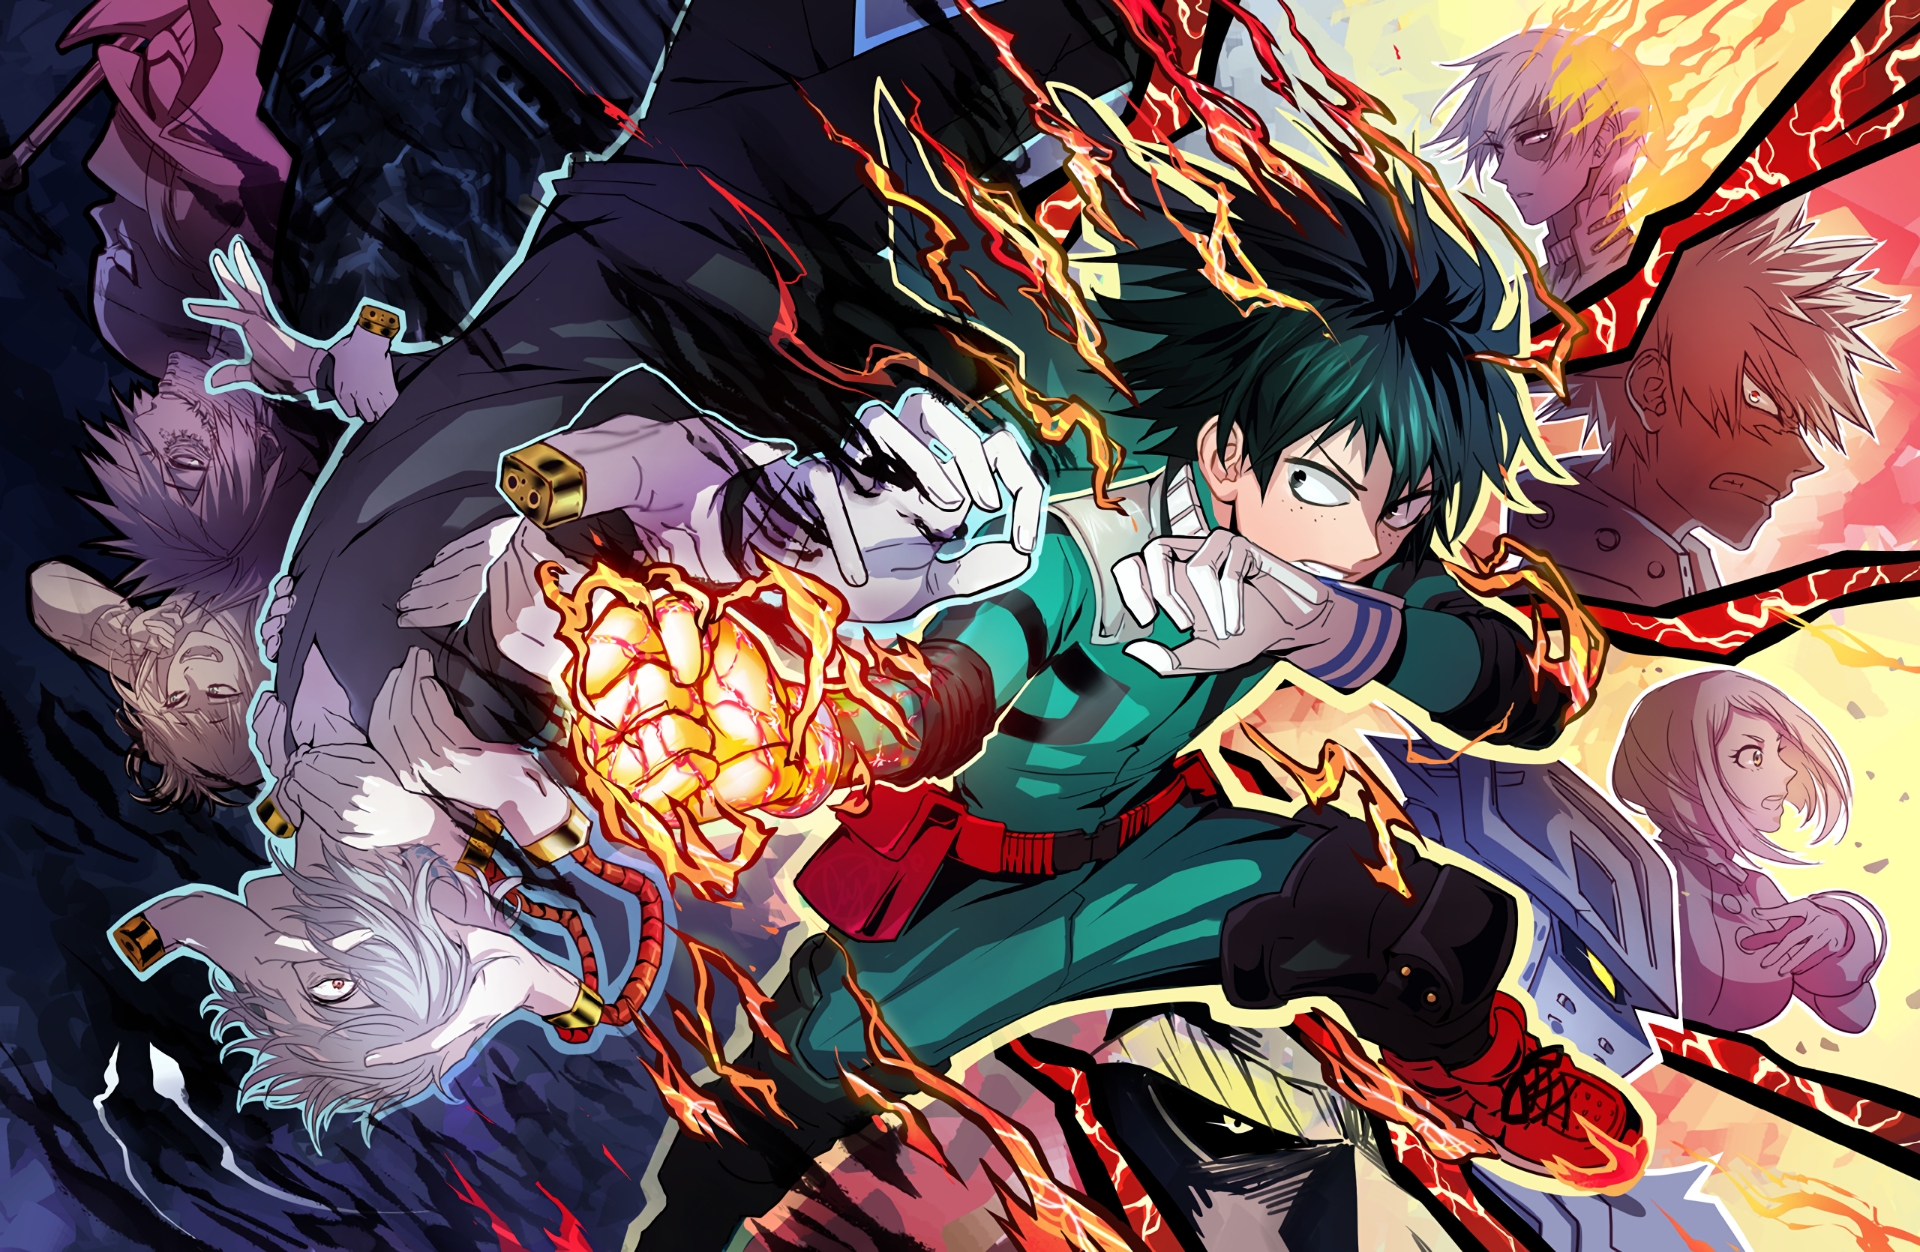 10 Top My Hero Academia Wallpaper FULL HD 1920×1080 For PC Background 2021